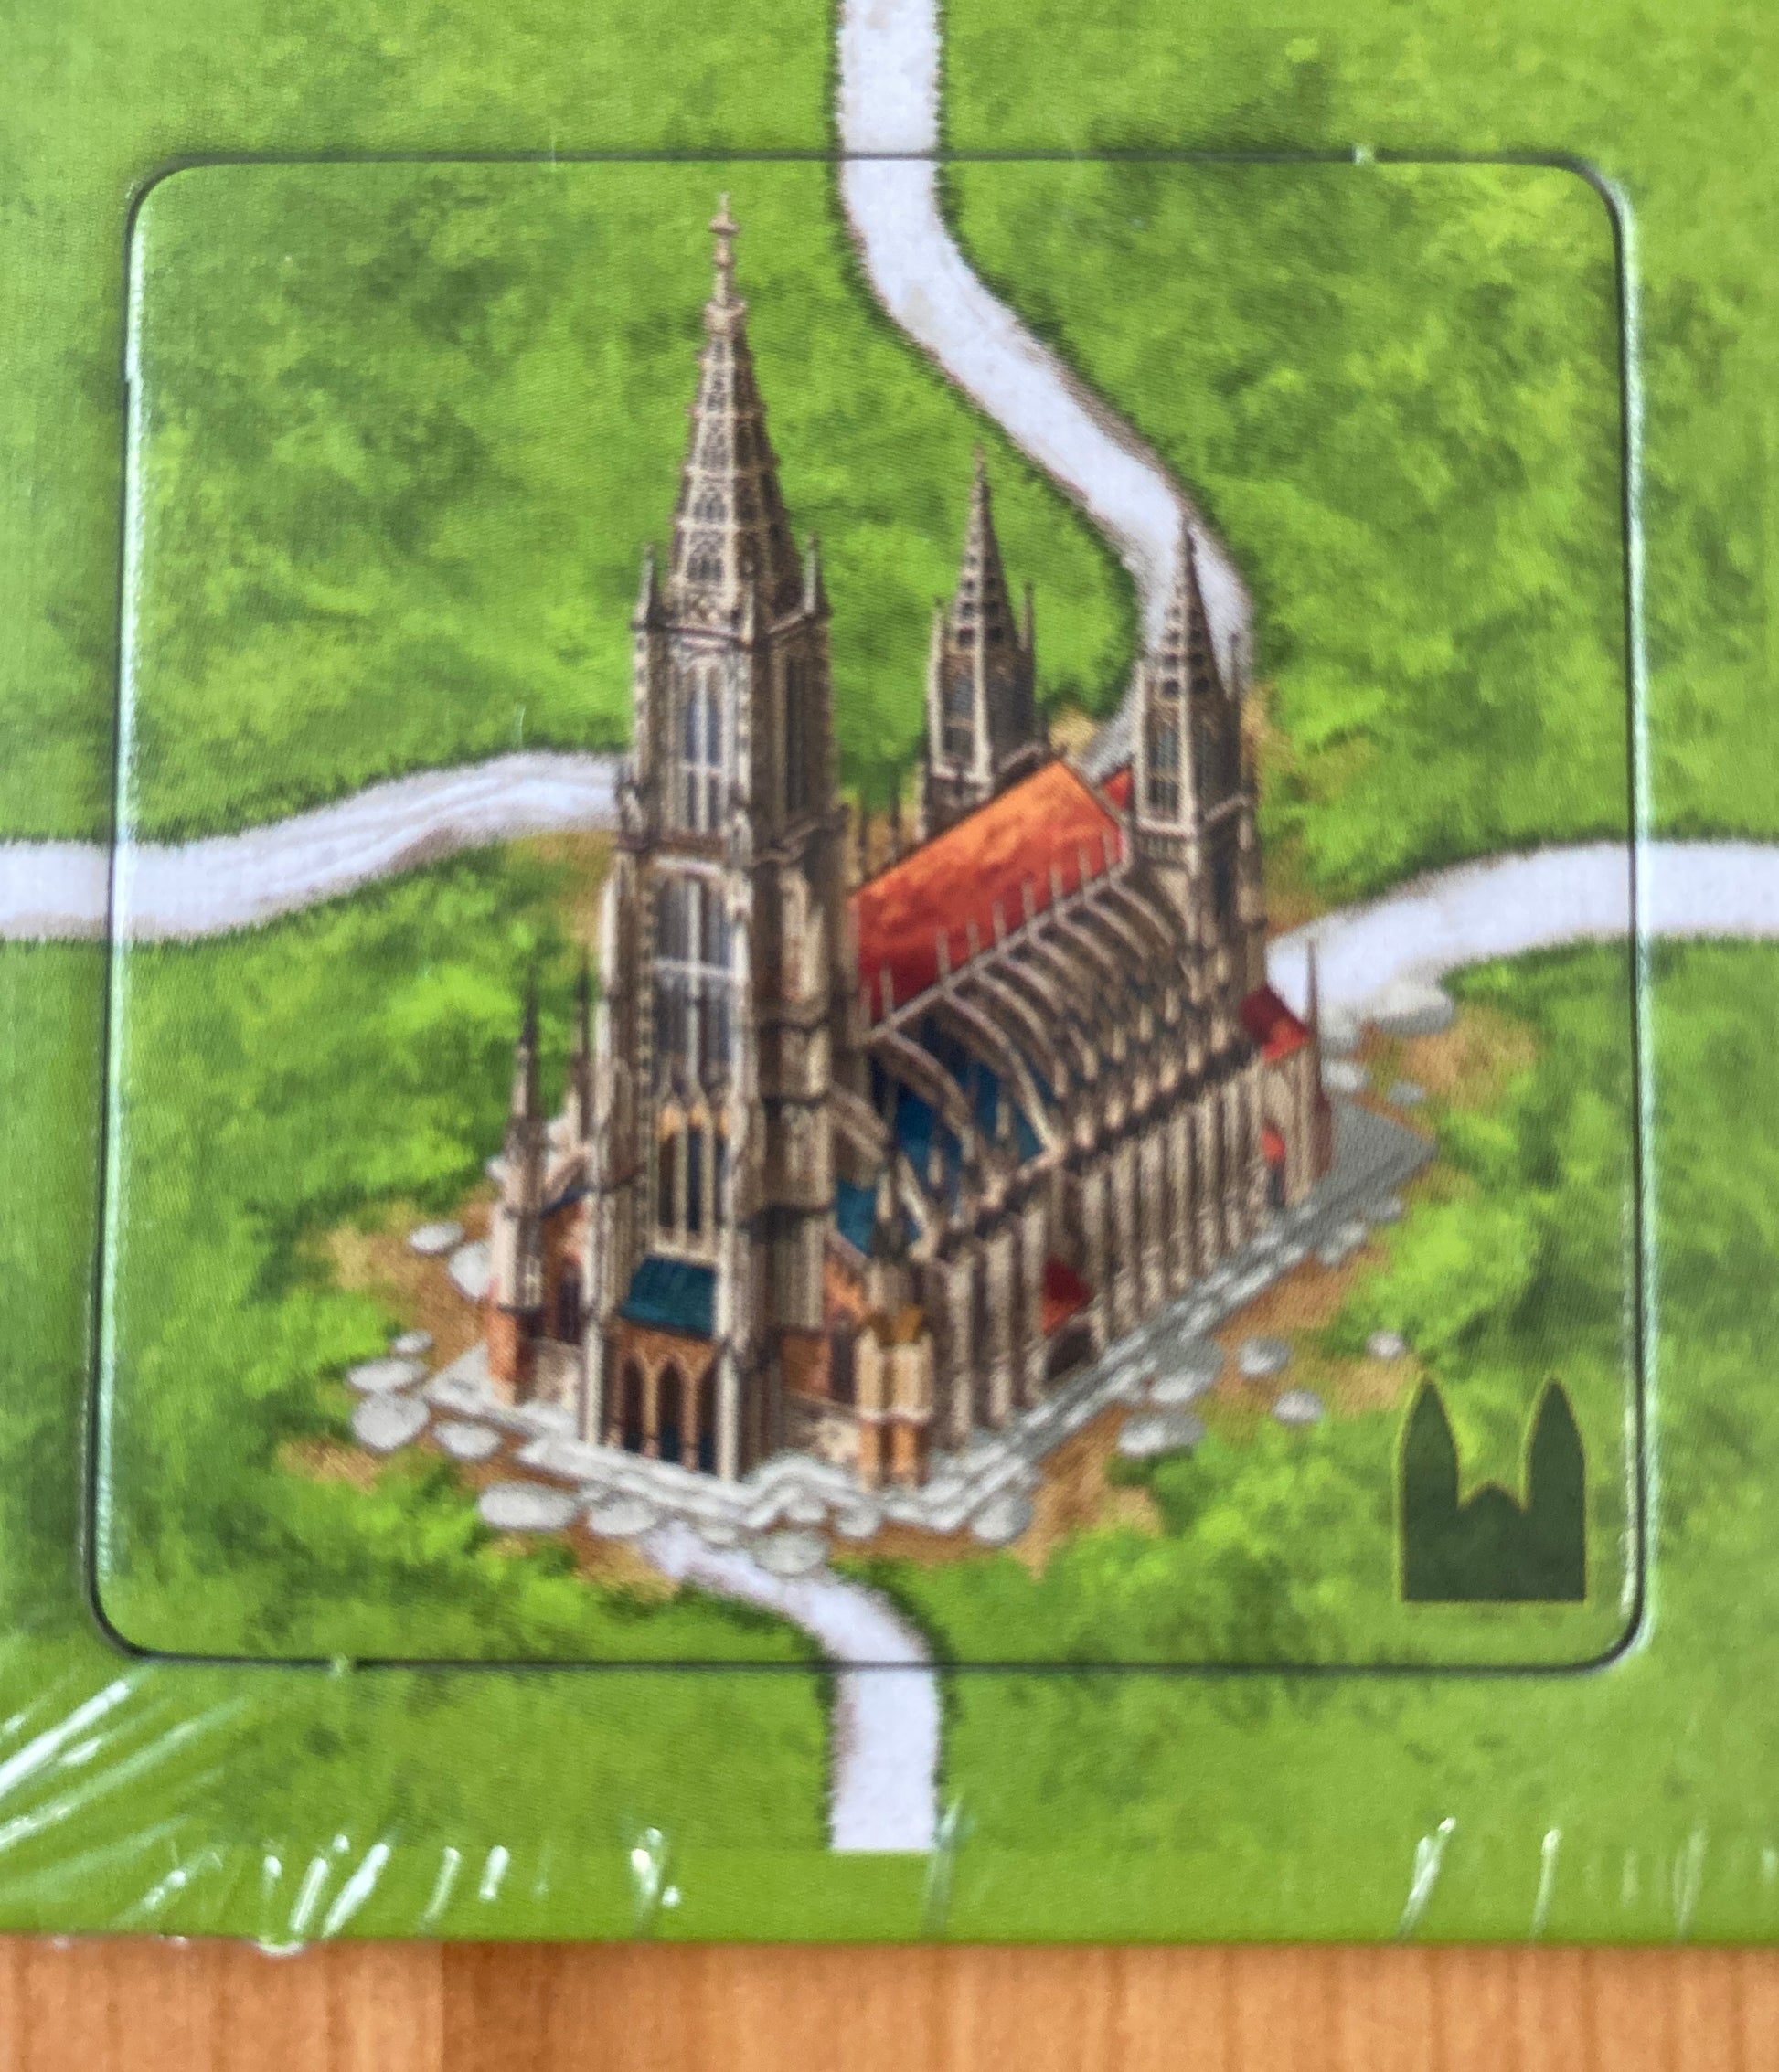 Another close-up view of a German Cathedral tile.